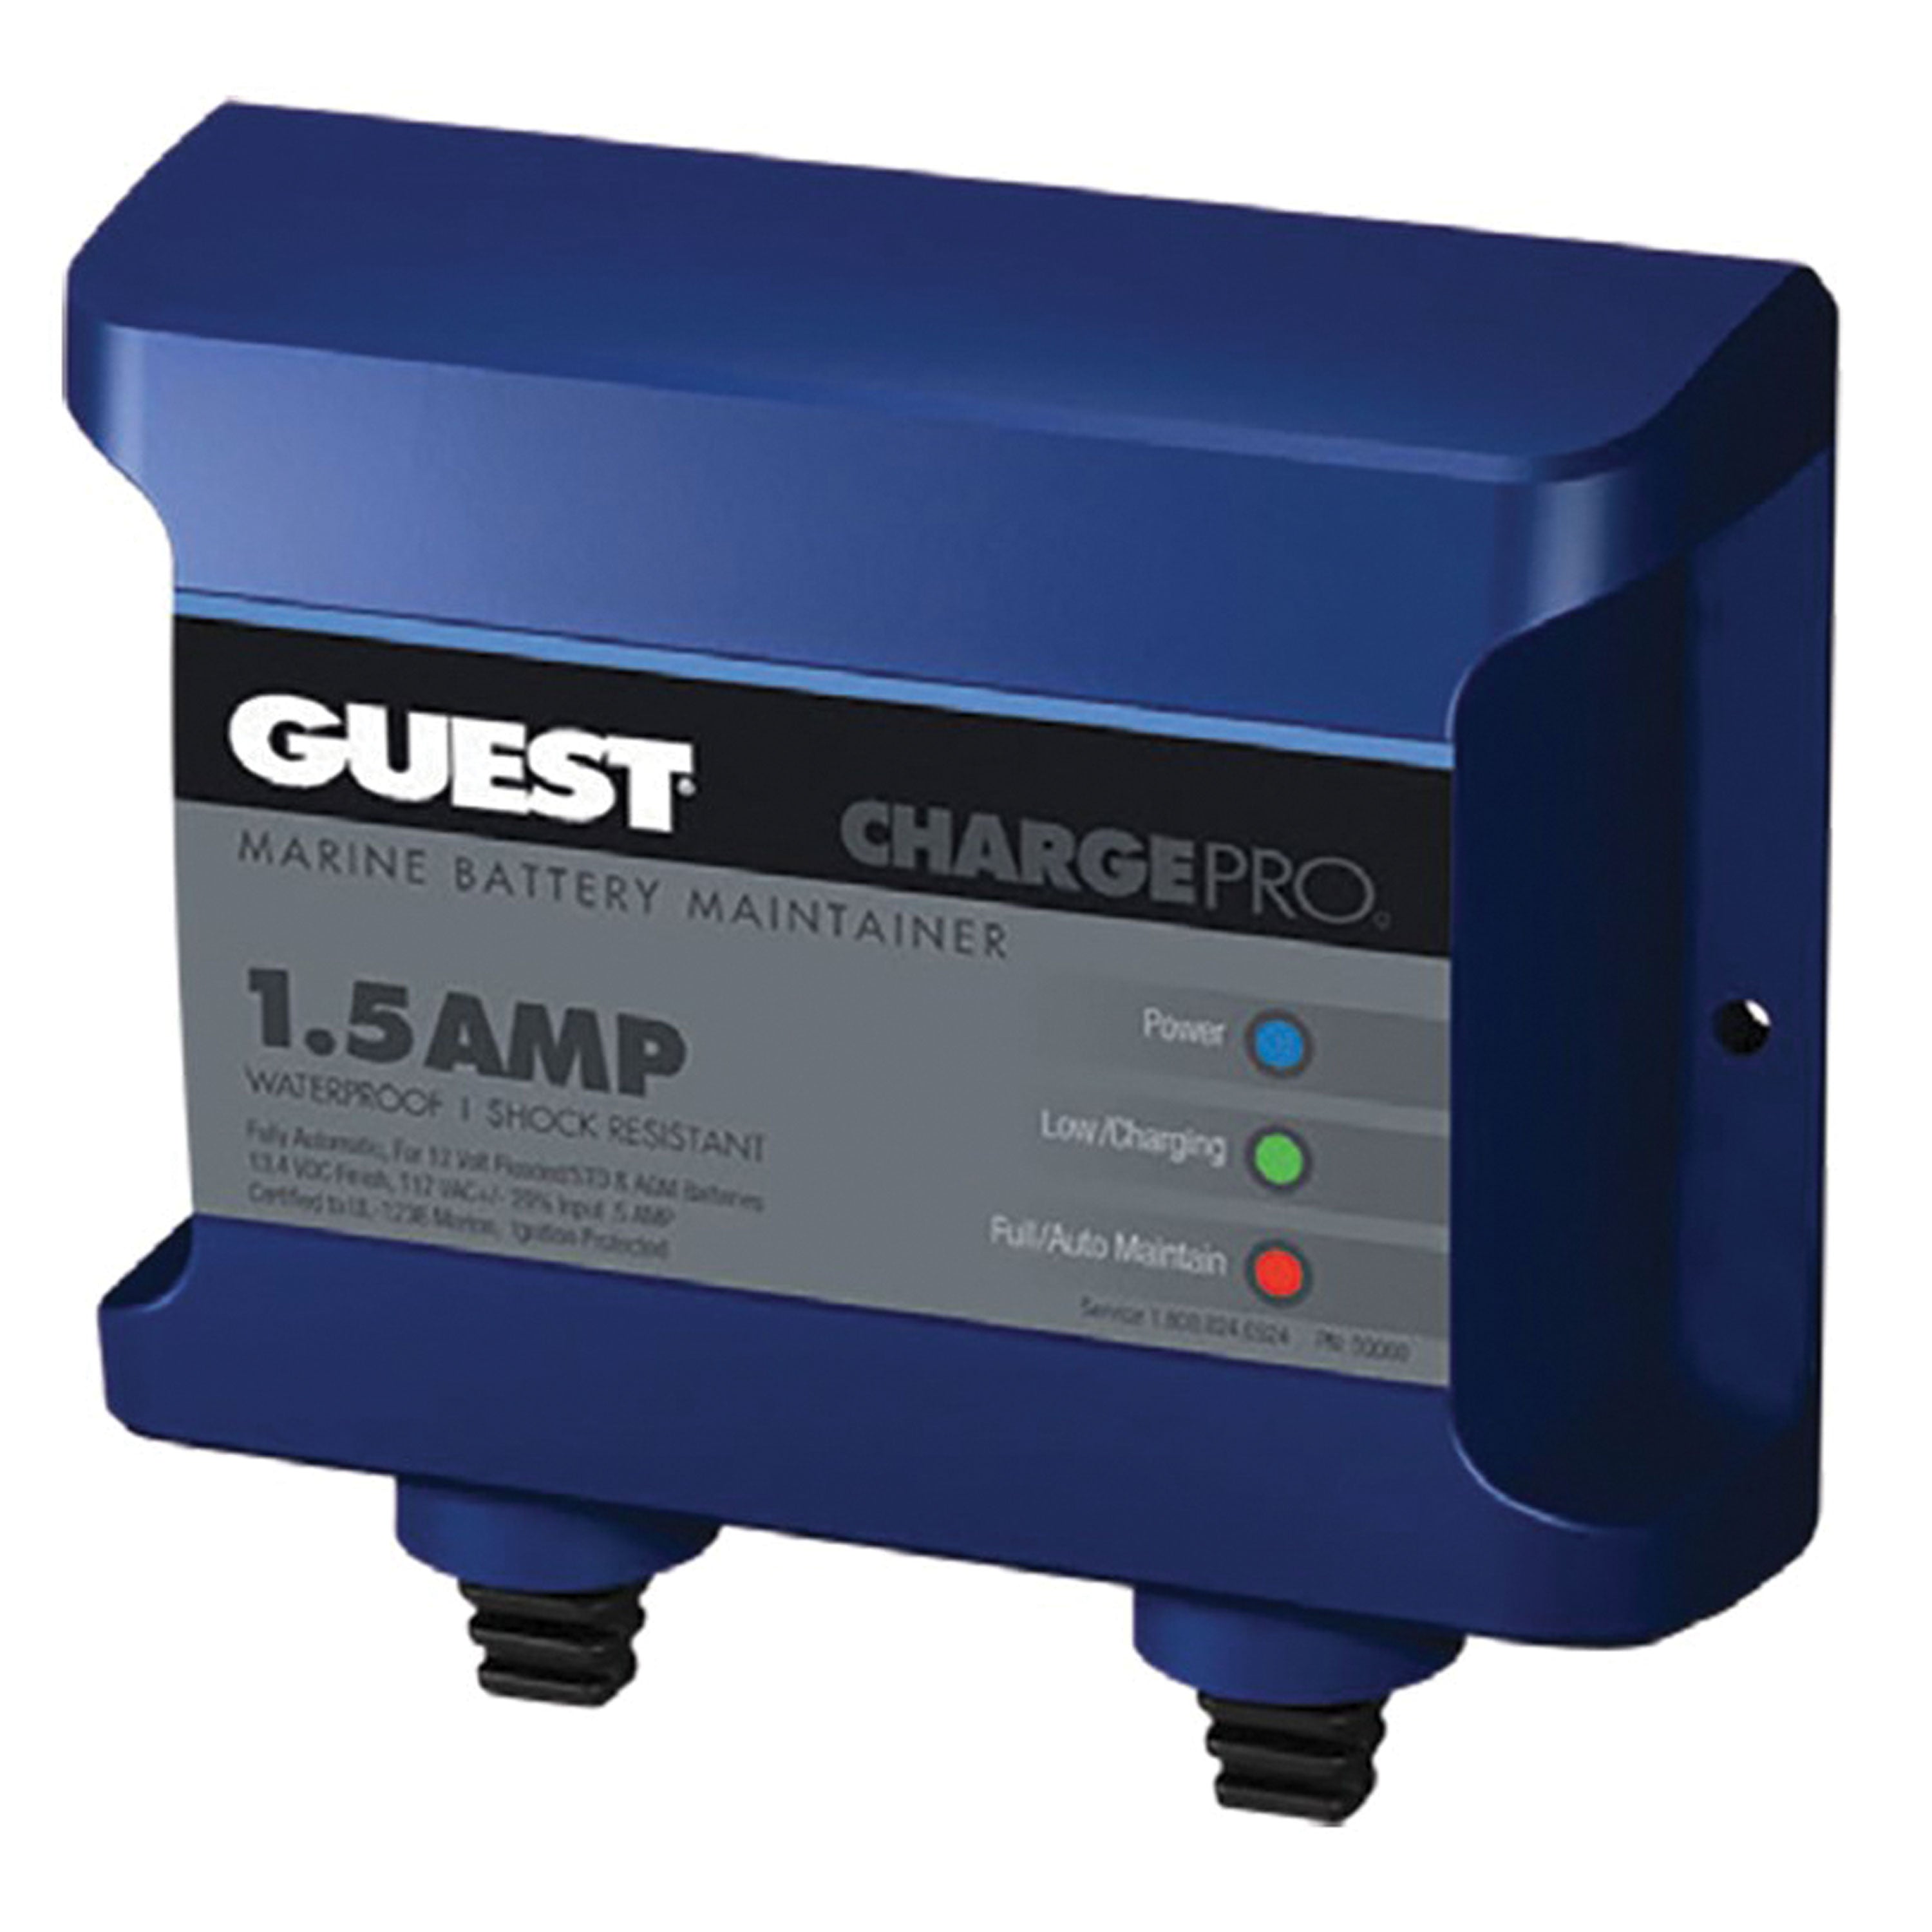 Guest 2701A Battery Maintainer - 1.5A, 1 Bank, 120V